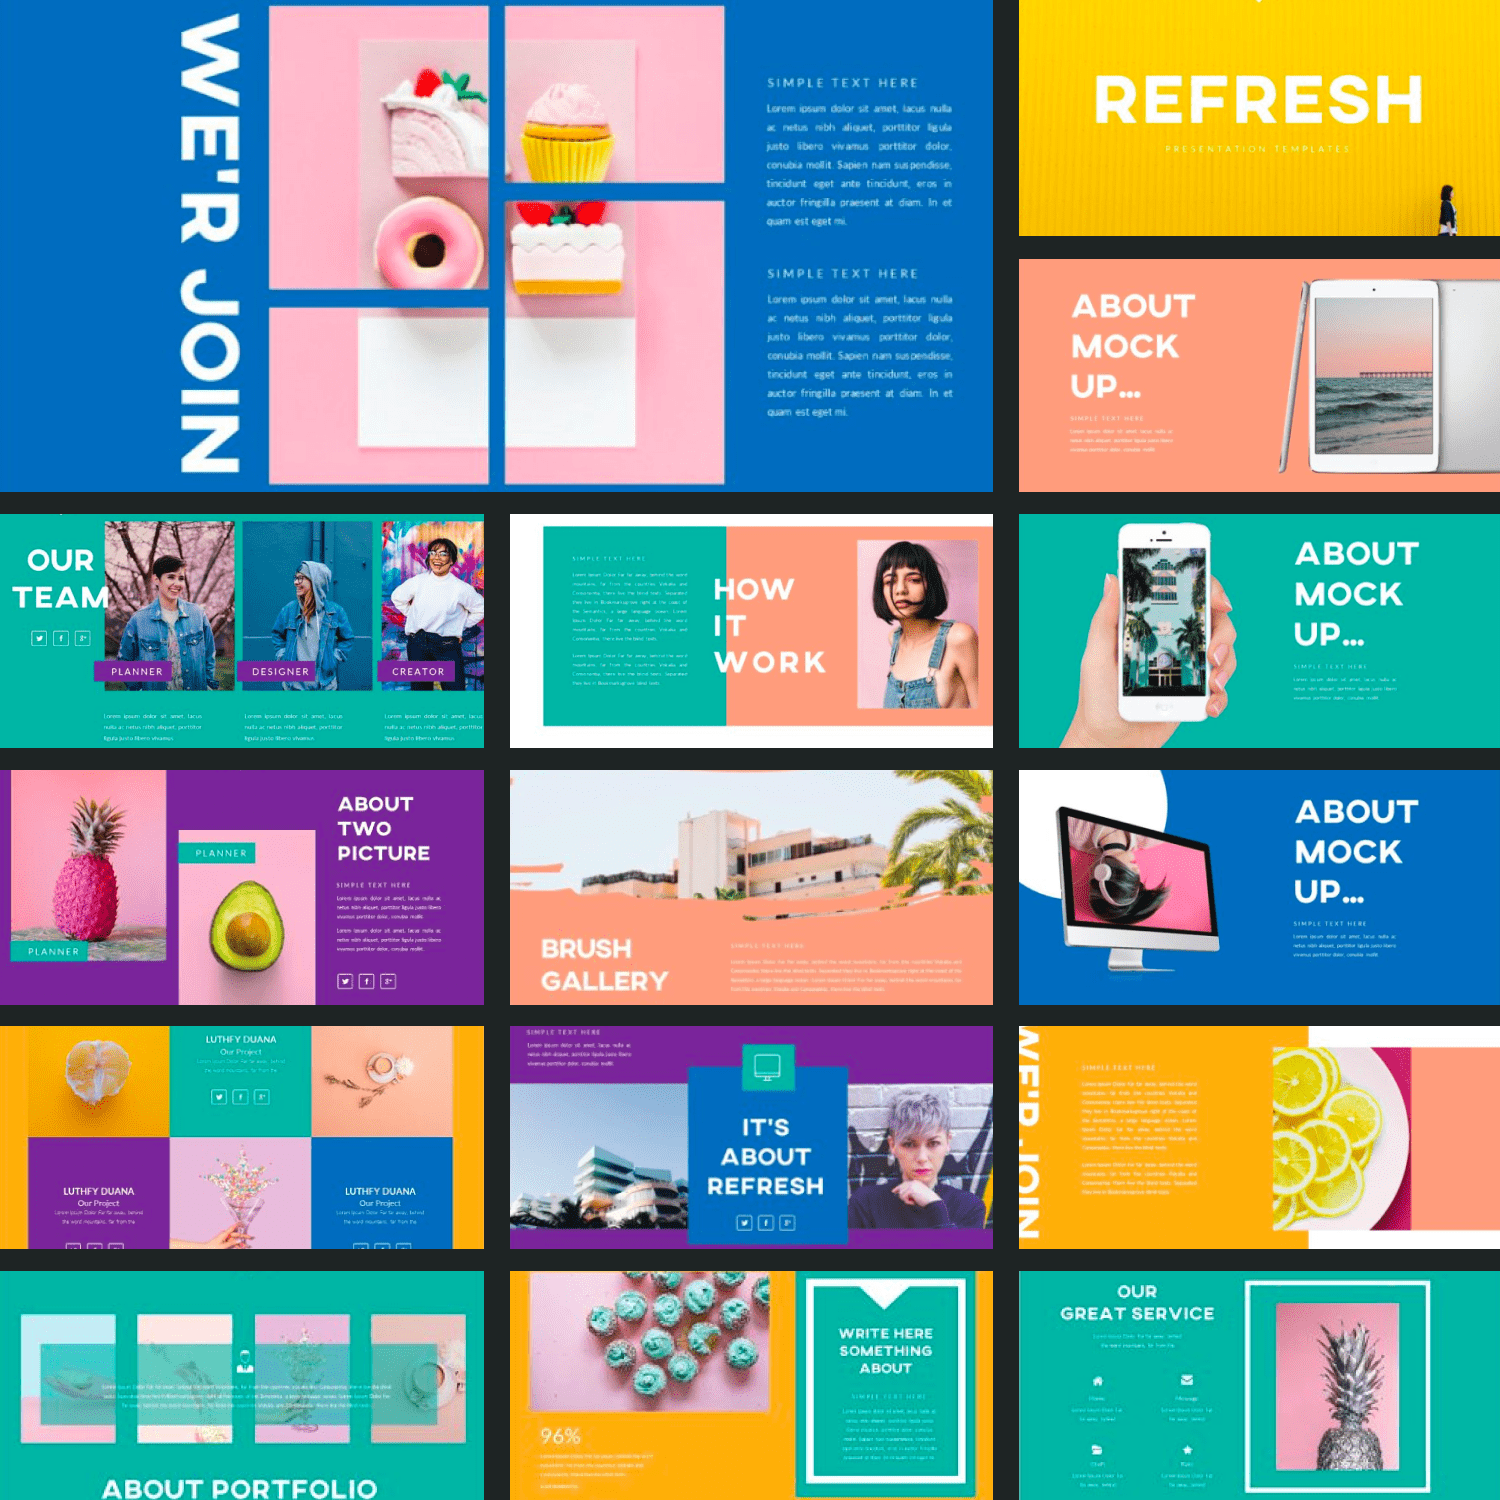 Refresh Powerpoint Template by MasterBundles Collage Image.